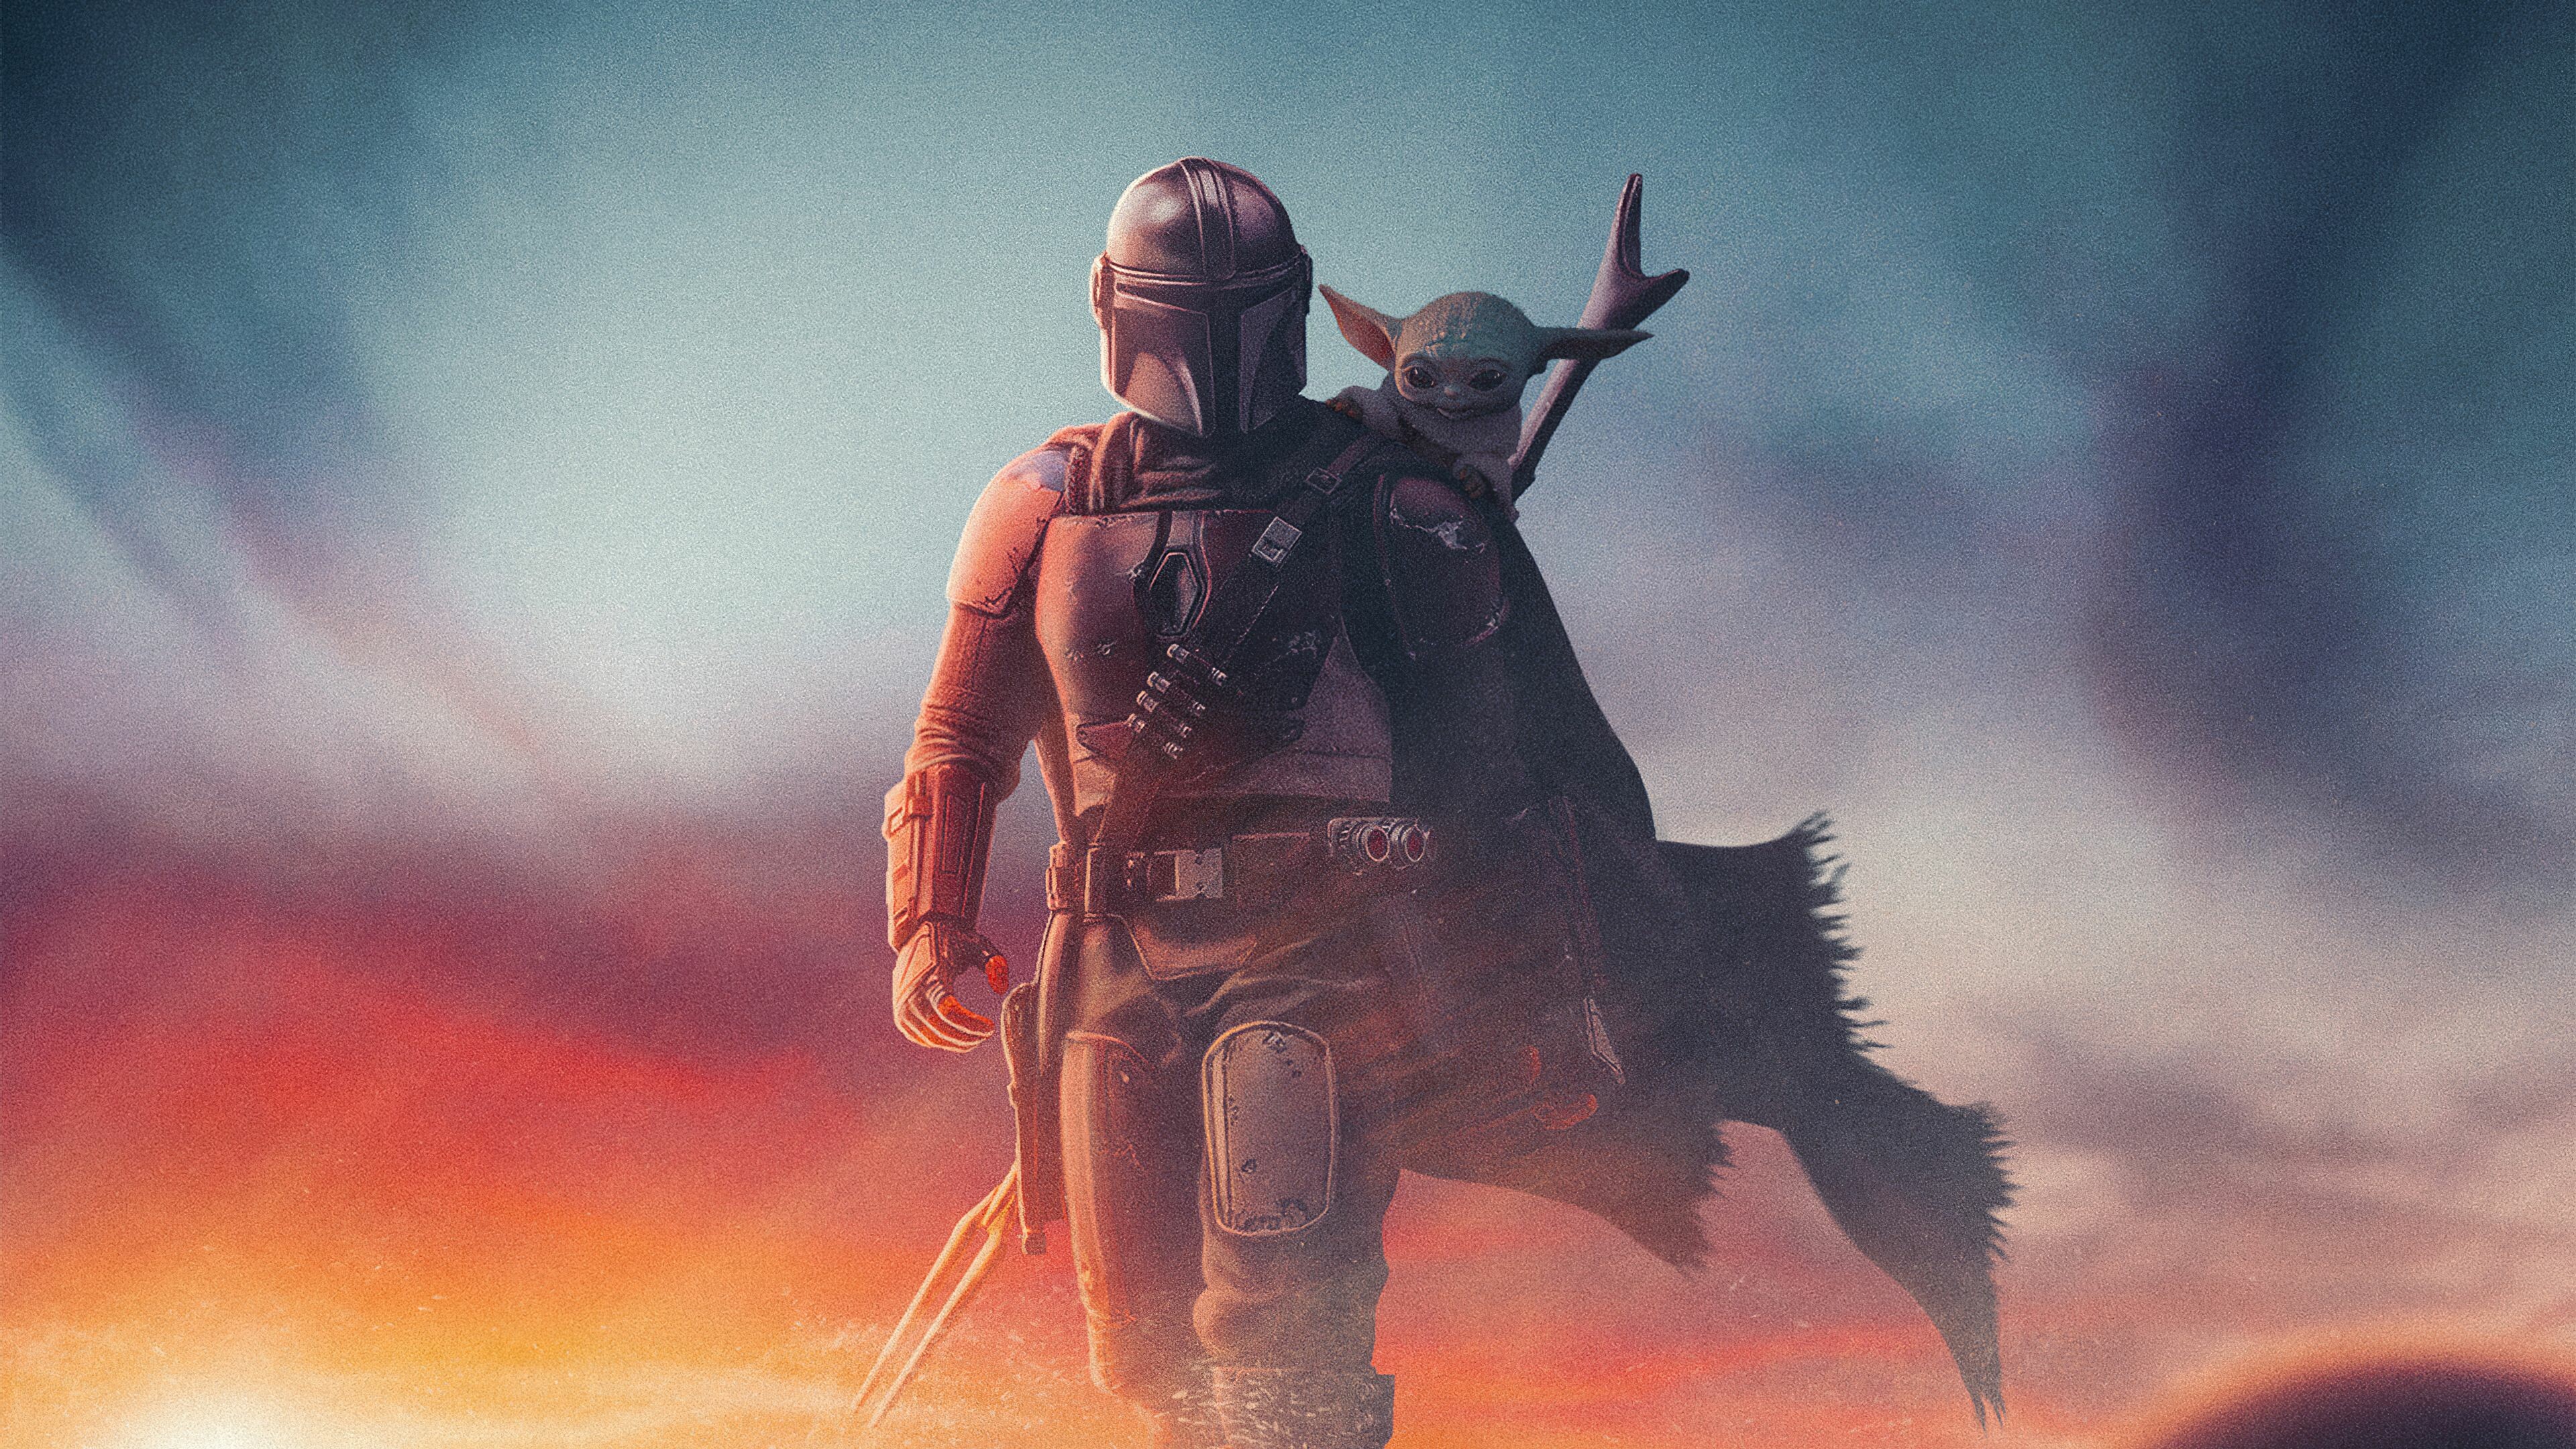 The Mandalorian: Pedro Pascal as the title character, a lone bounty hunter who goes on the run to protect "the Child". 3840x2160 4K Background.